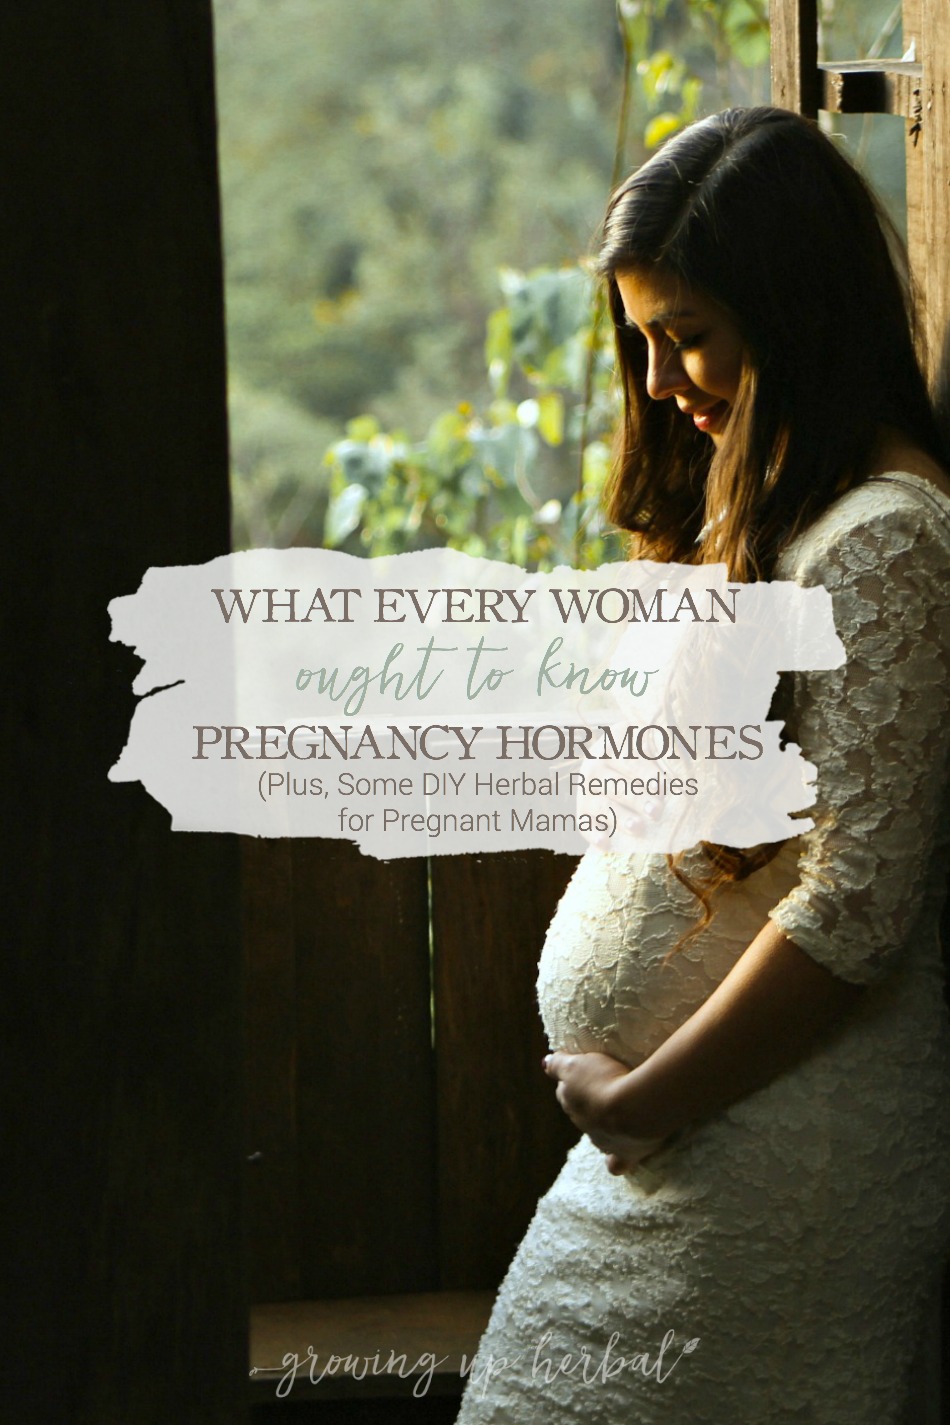 What Every Woman Ought To Know About Pregnancy Hormones | Growing Up Herbal | Come learn about pregnancy hormones and how they contribute to common pregnancy-related ailments. Plus, I’m sharing some helpful DIY herbal recipes to help support the body through these ailments as well!